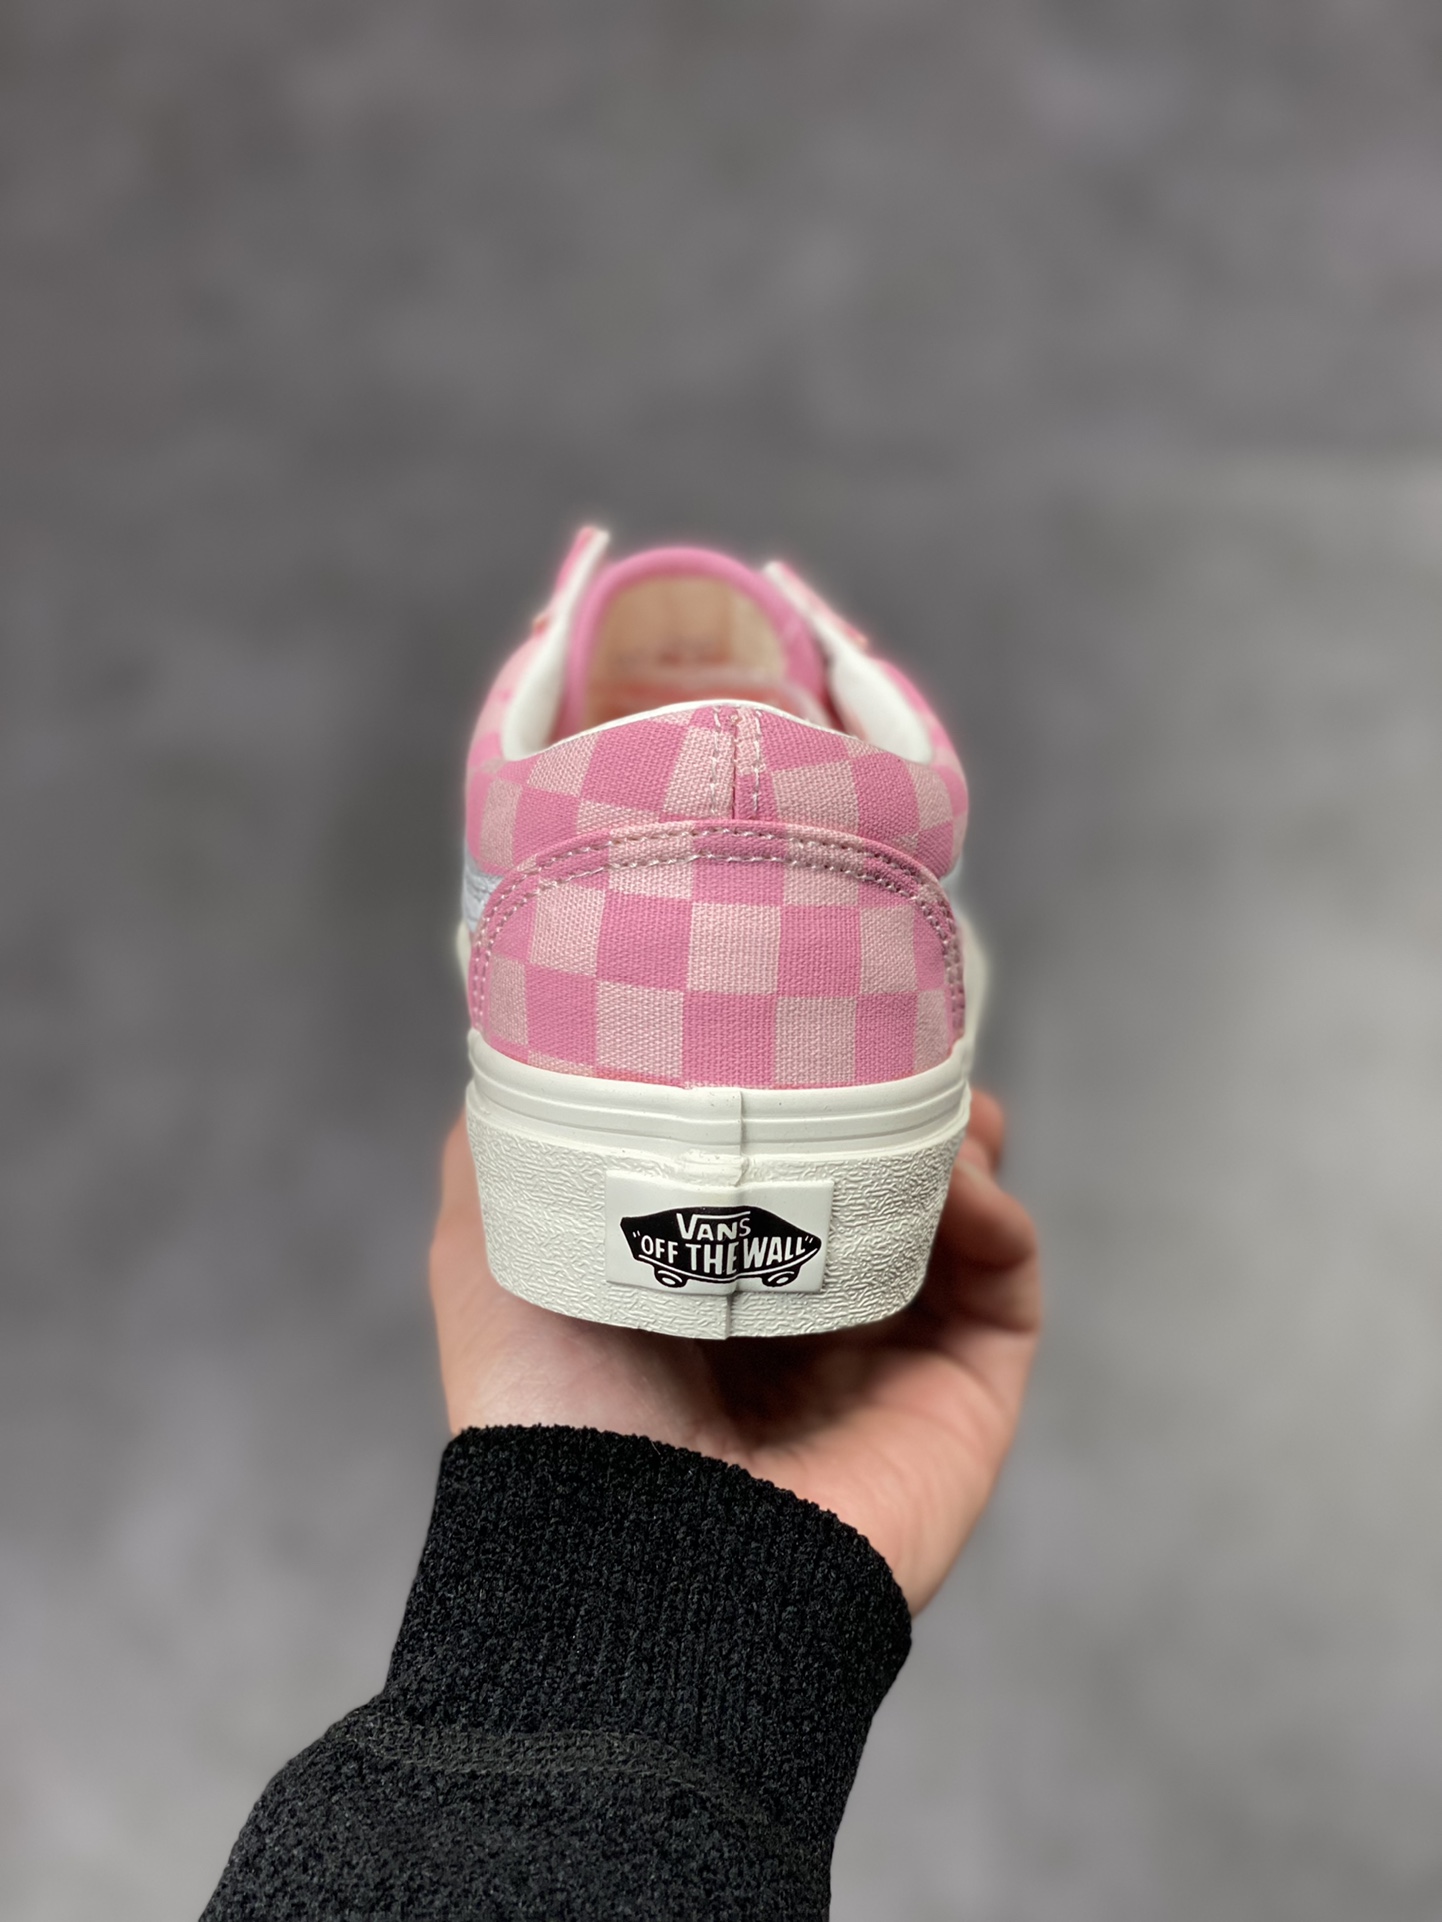 Vans Old Skool Vans official cherry blossom pink checkerboard sneakers canvas shoes VN0A7Q2JZY2